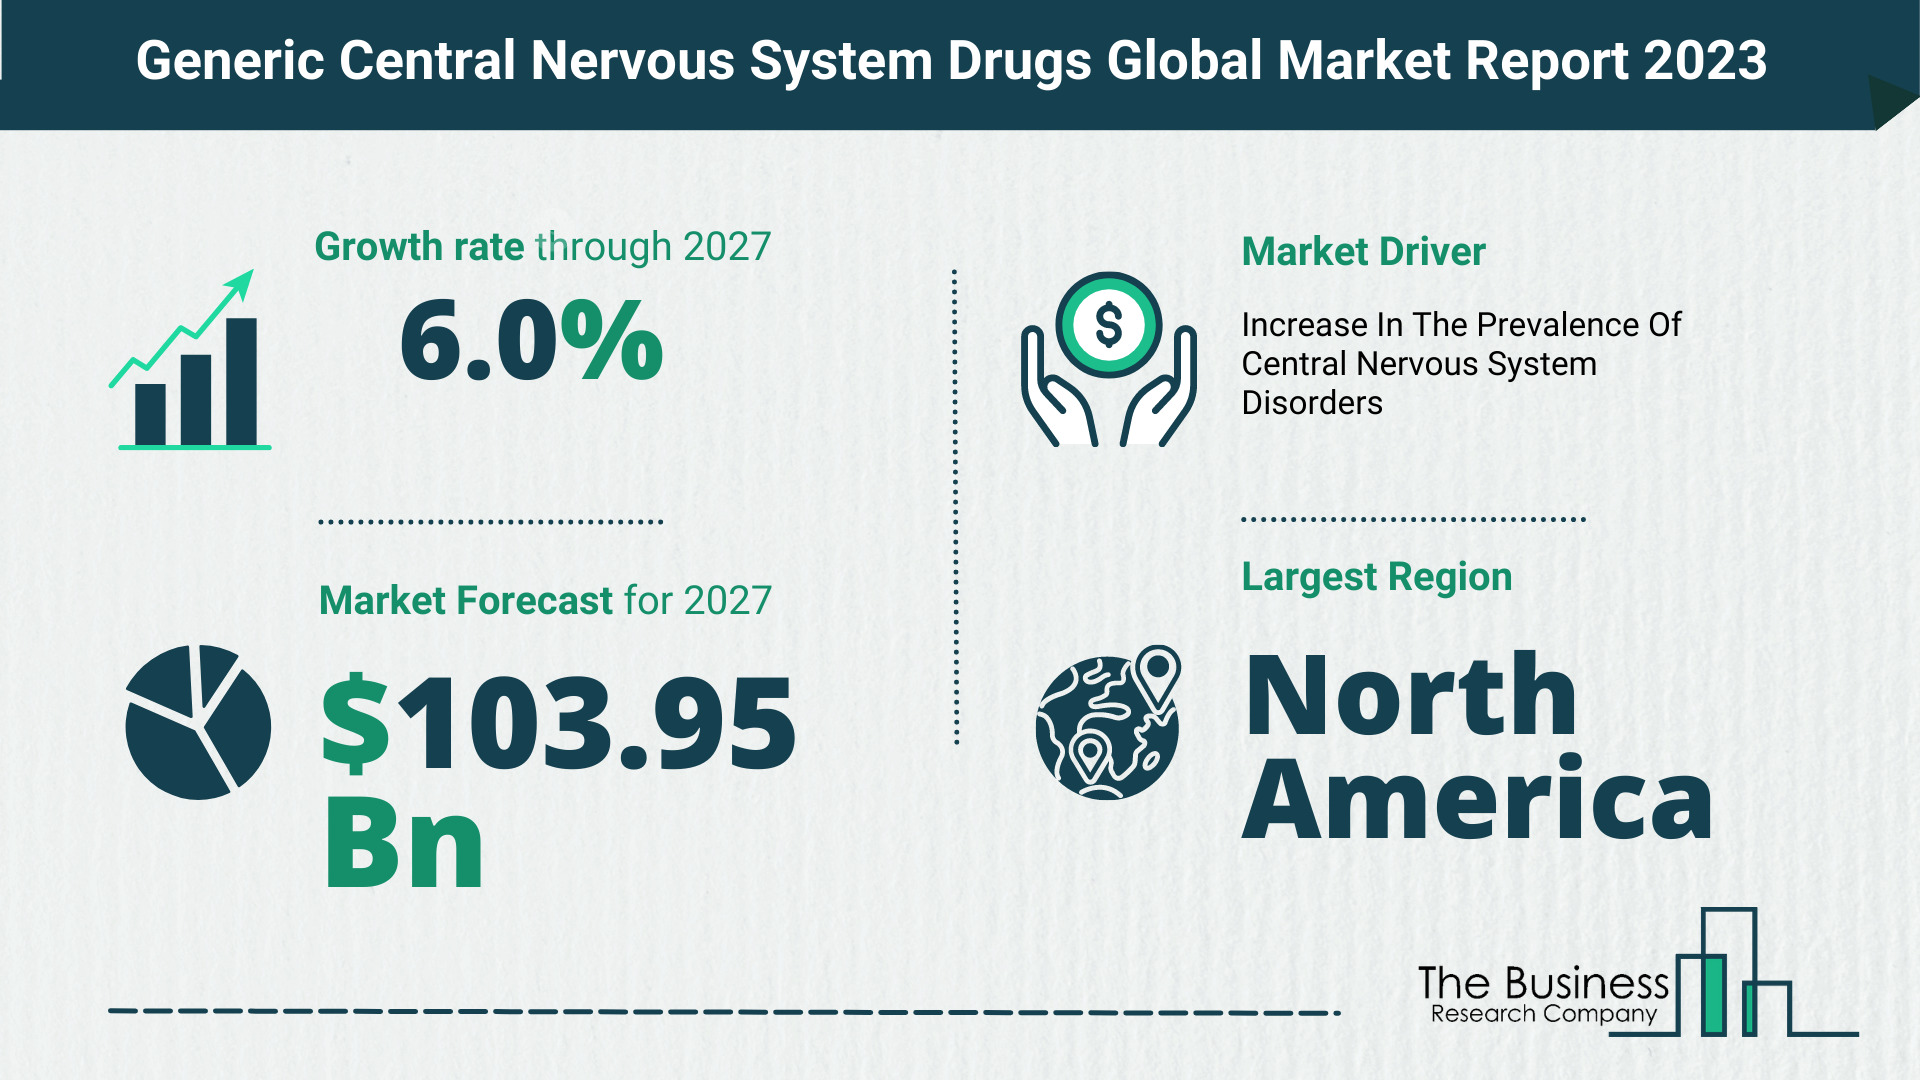 How Will The Generic Central Nervous System Drugs Market Globally Expand In 2023?